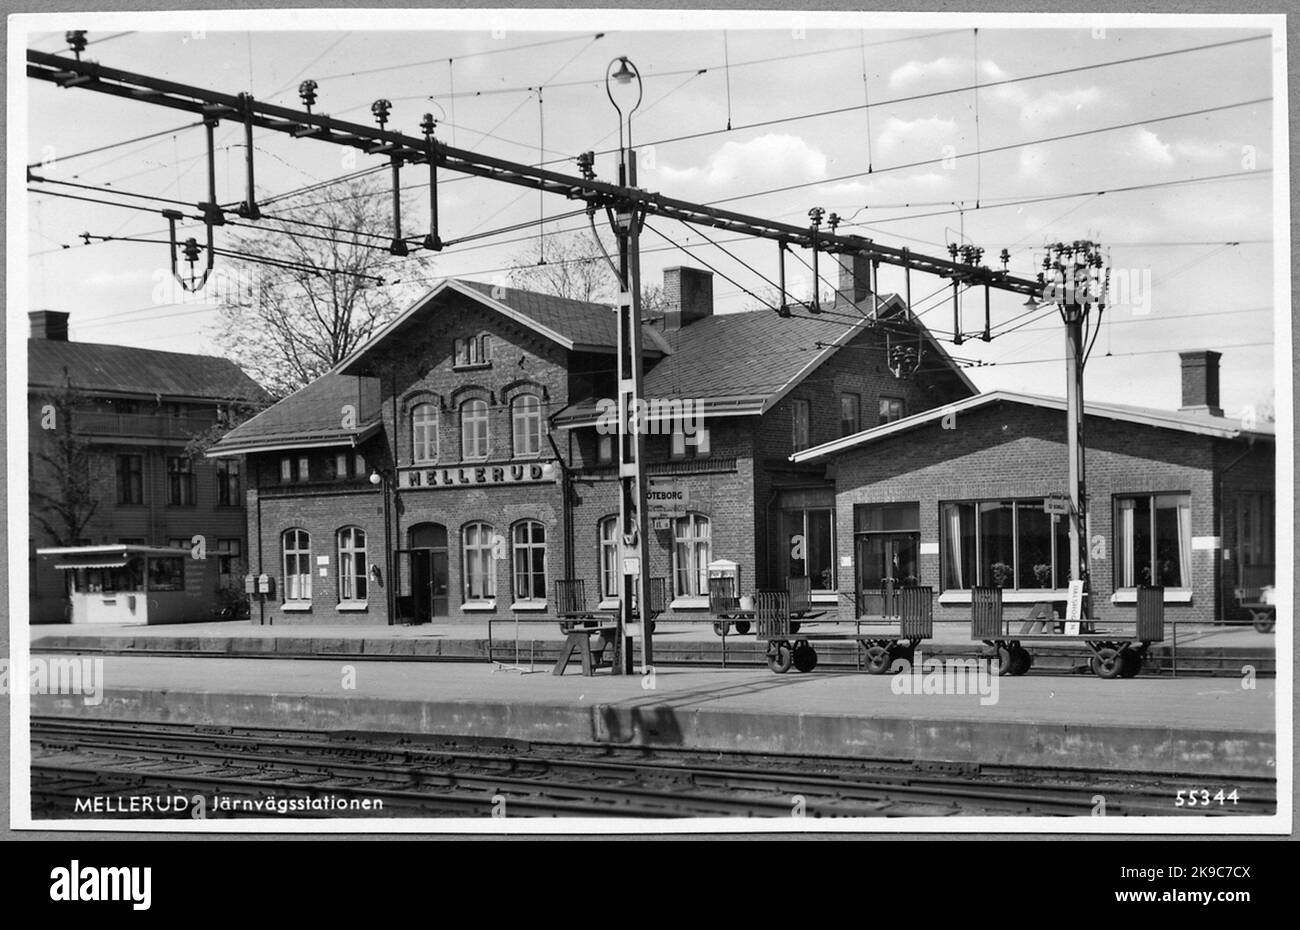 The station in Mellerud. Stock Photo